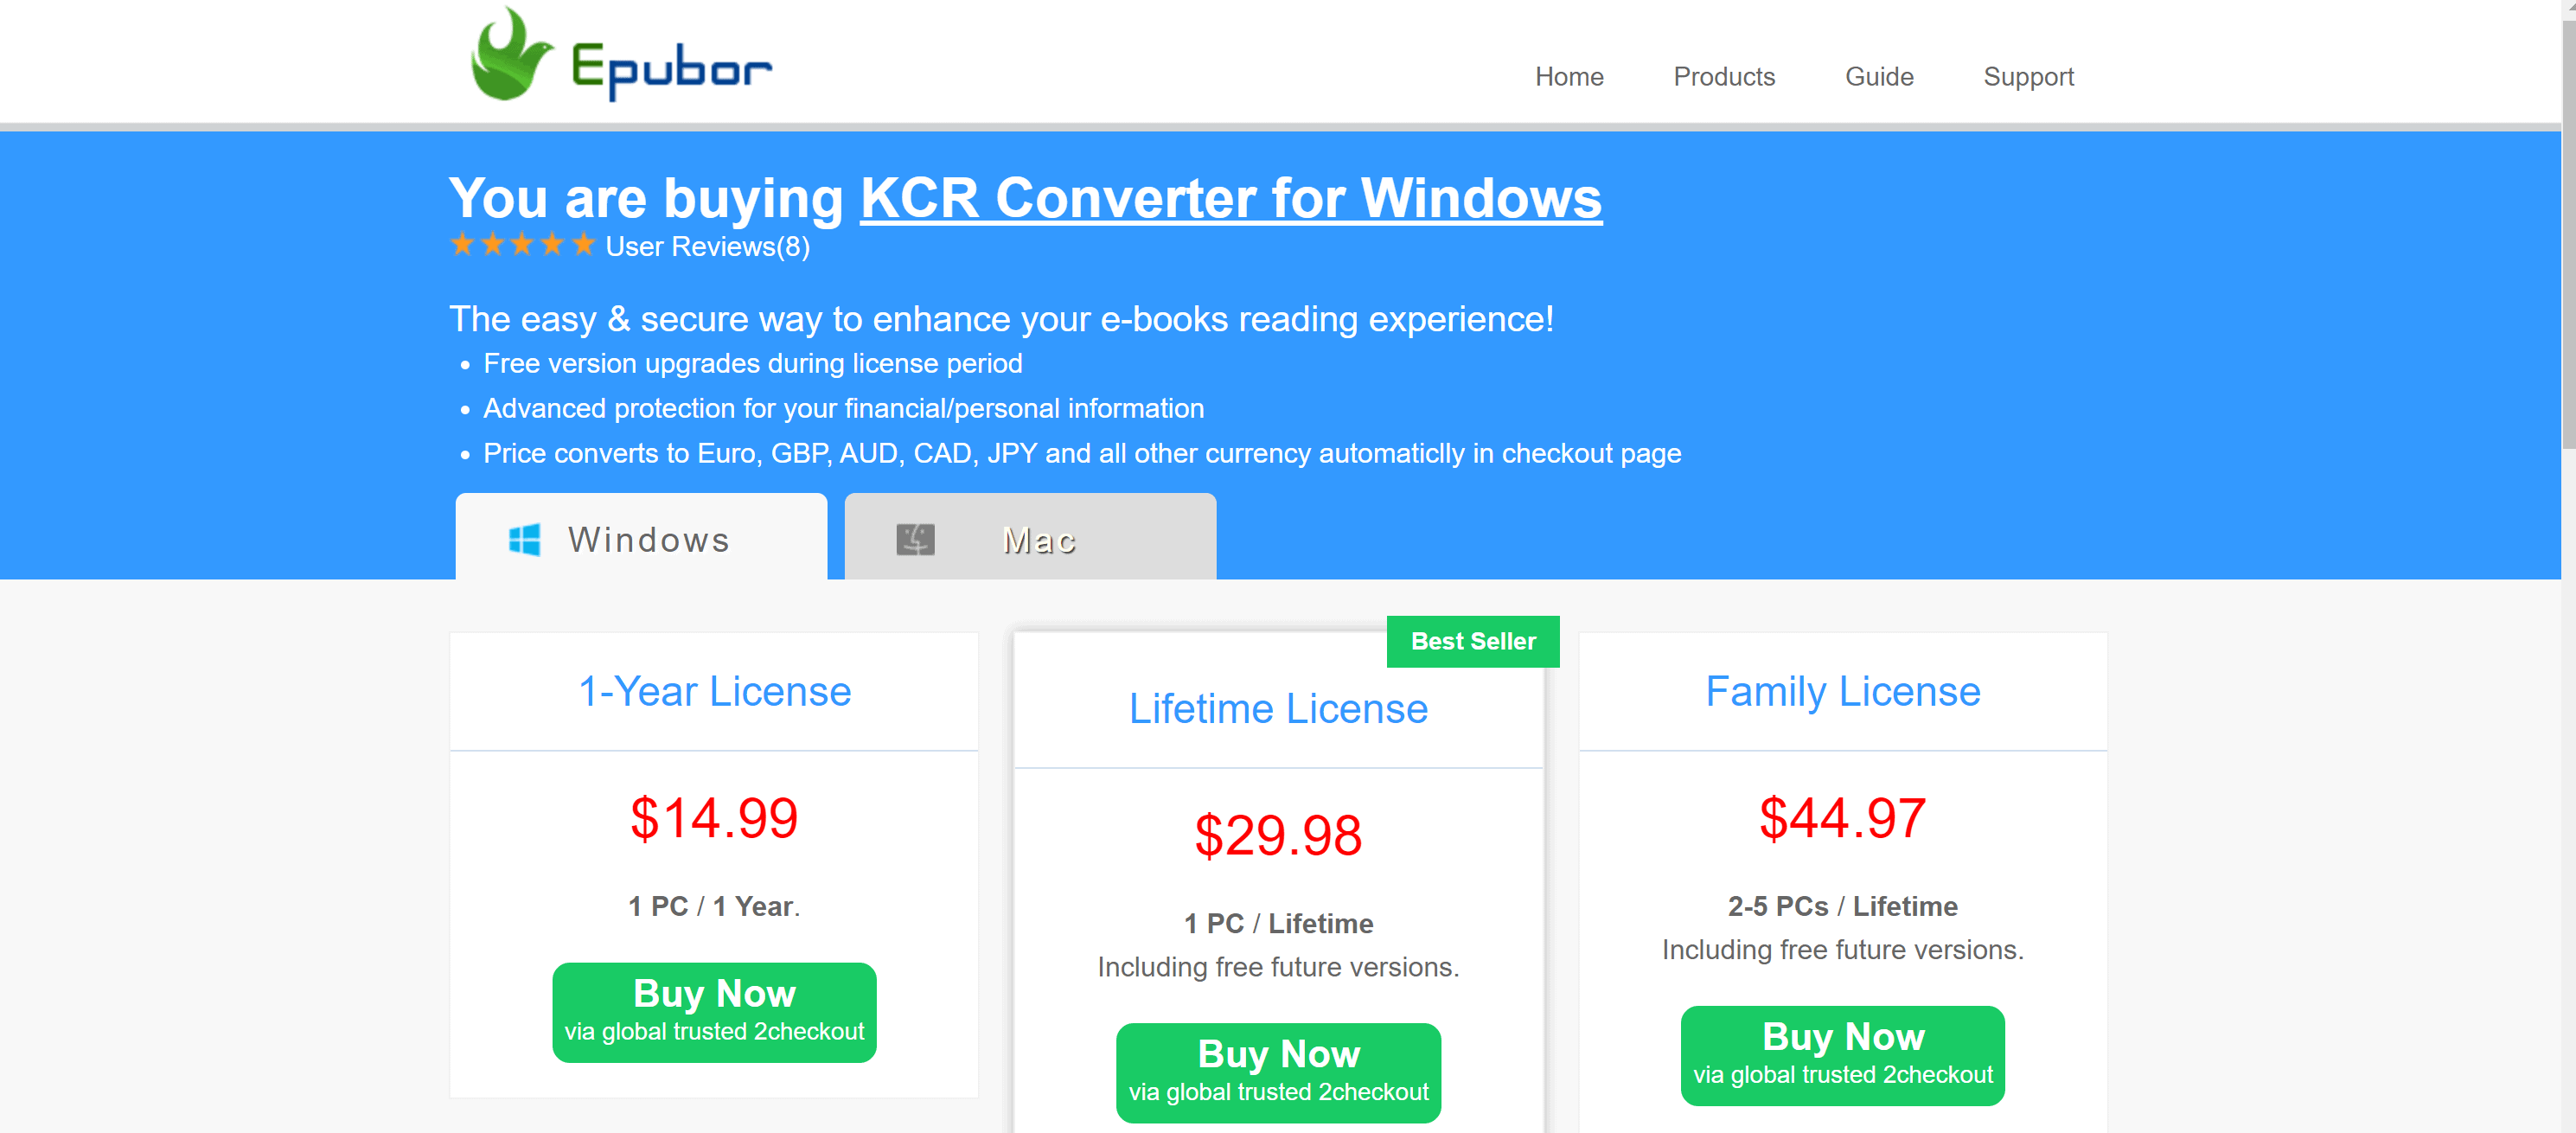 KCR Converter pricing with coupons- Epubor Ultimate discount code